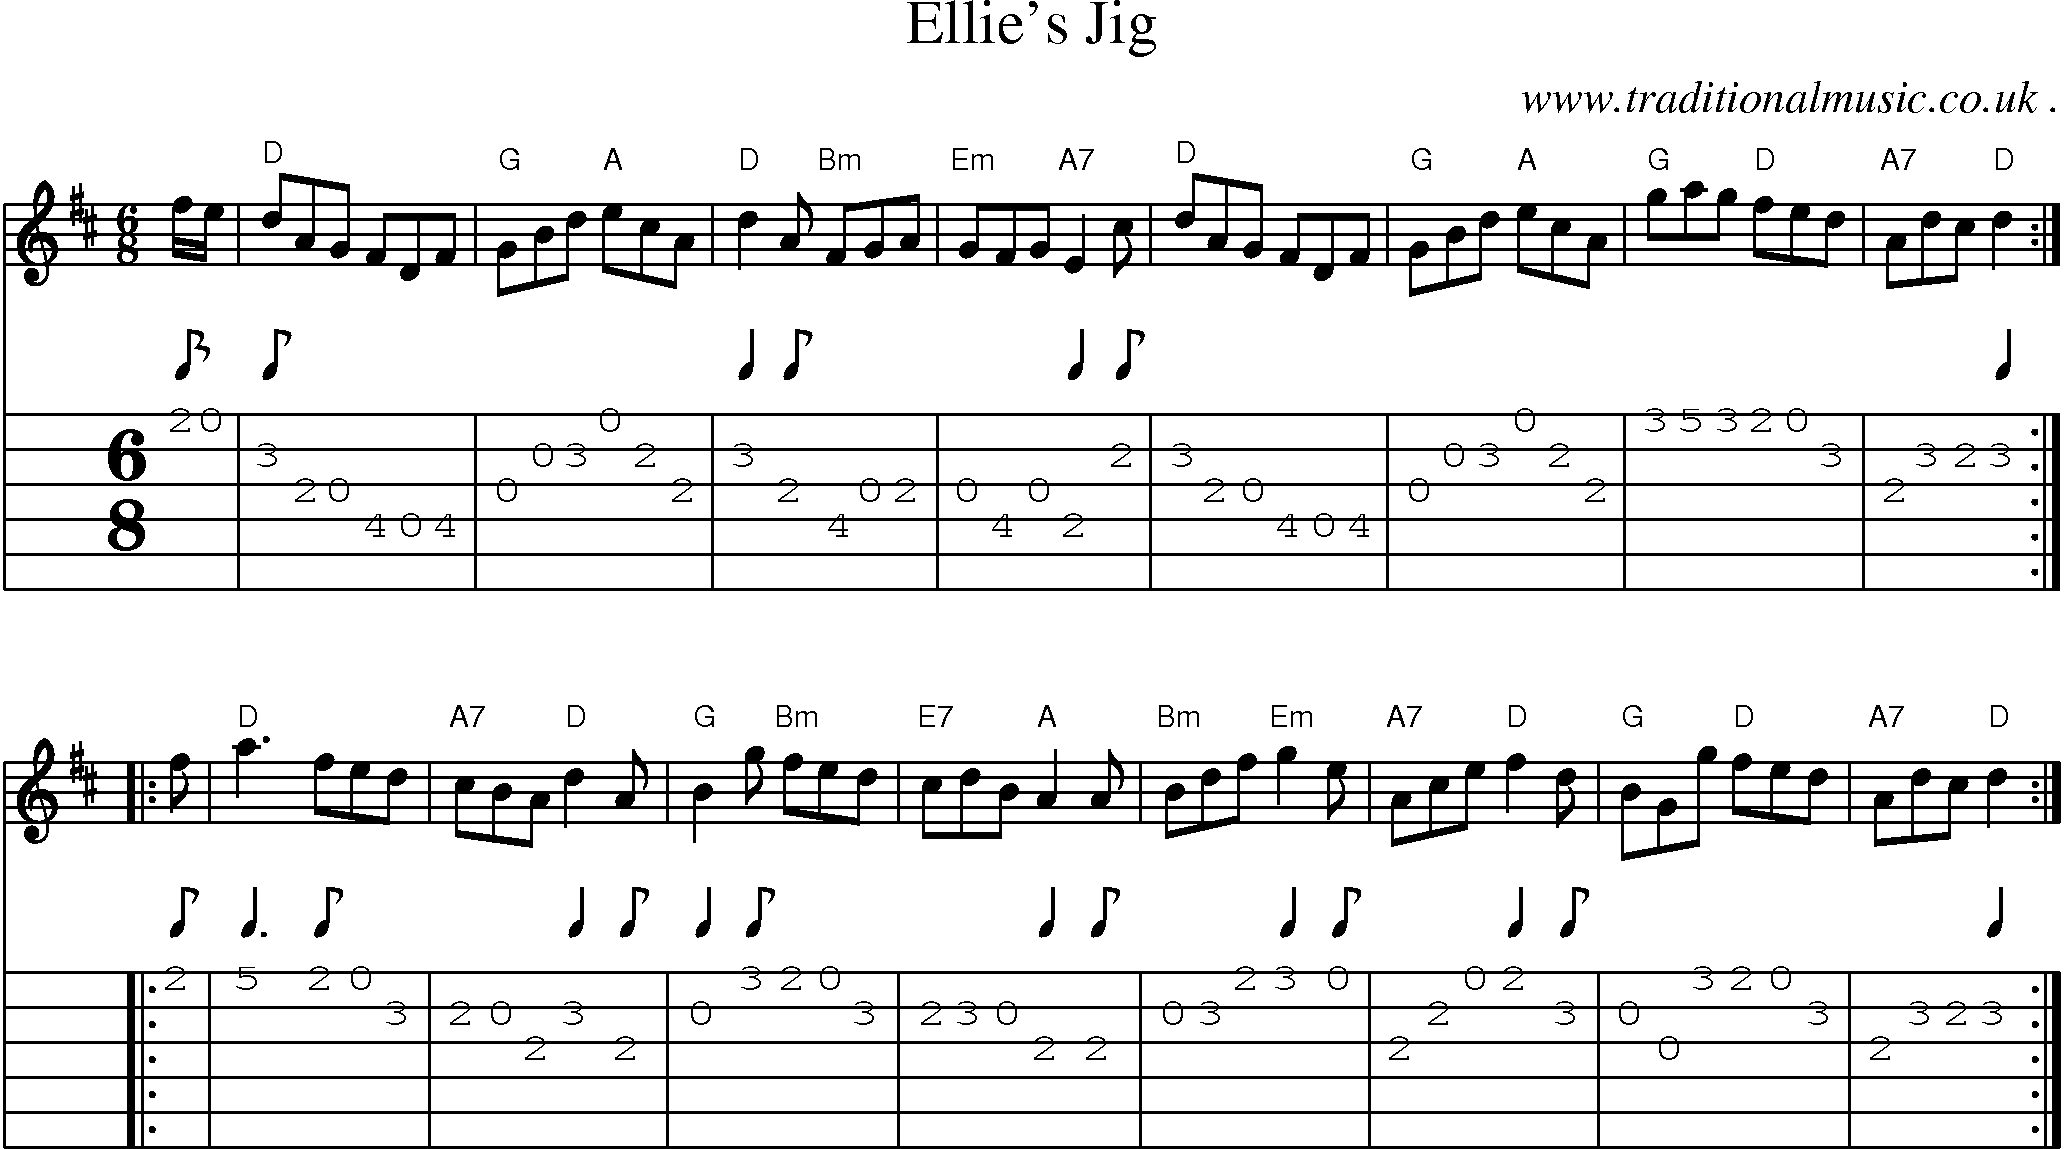 Sheet-music  score, Chords and Guitar Tabs for Ellies Jig